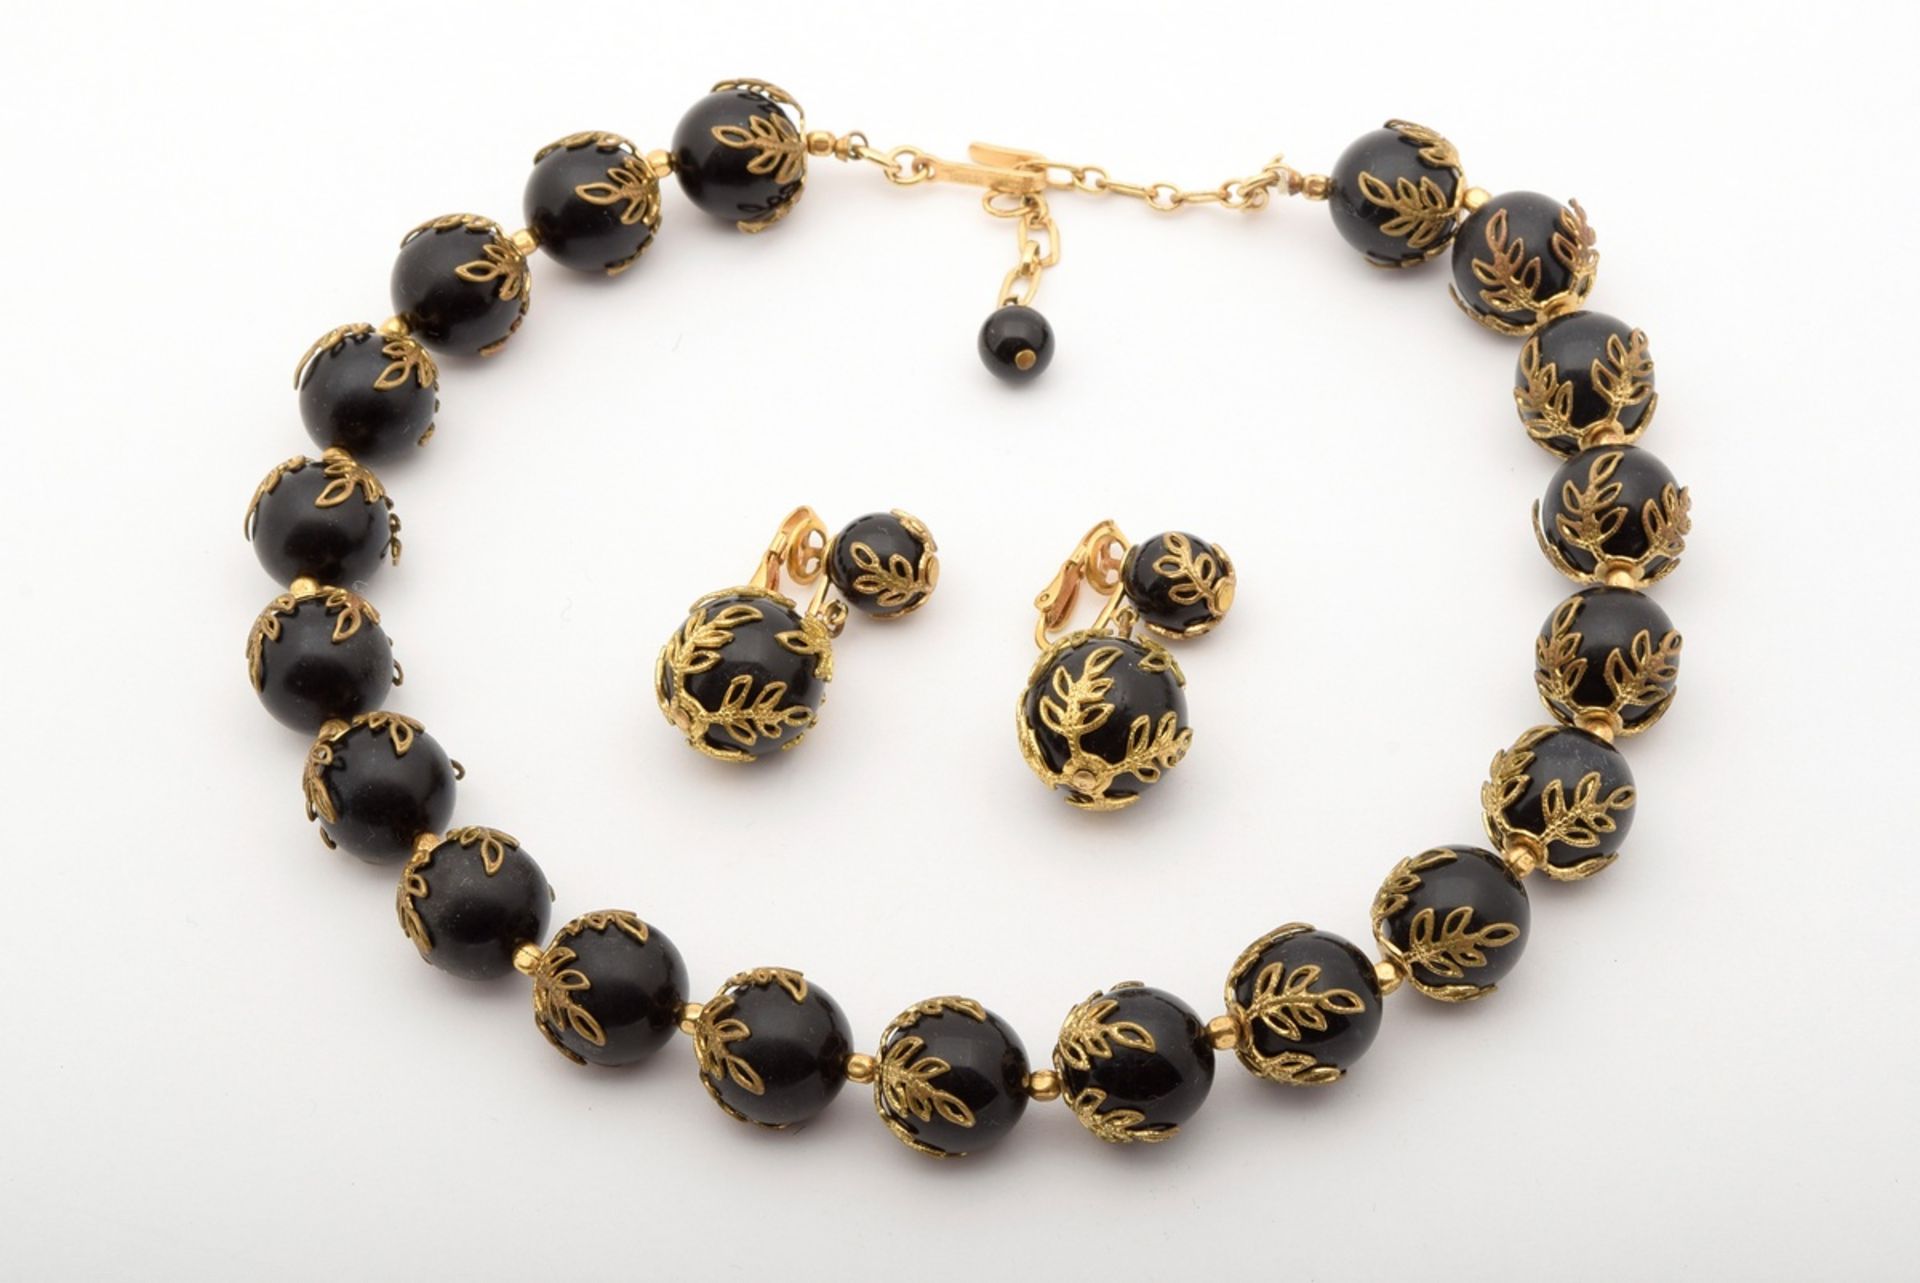 3 pieces gold-plated costume jewellery with black plastic beads, signed "Trifari": 1x necklace (l. 